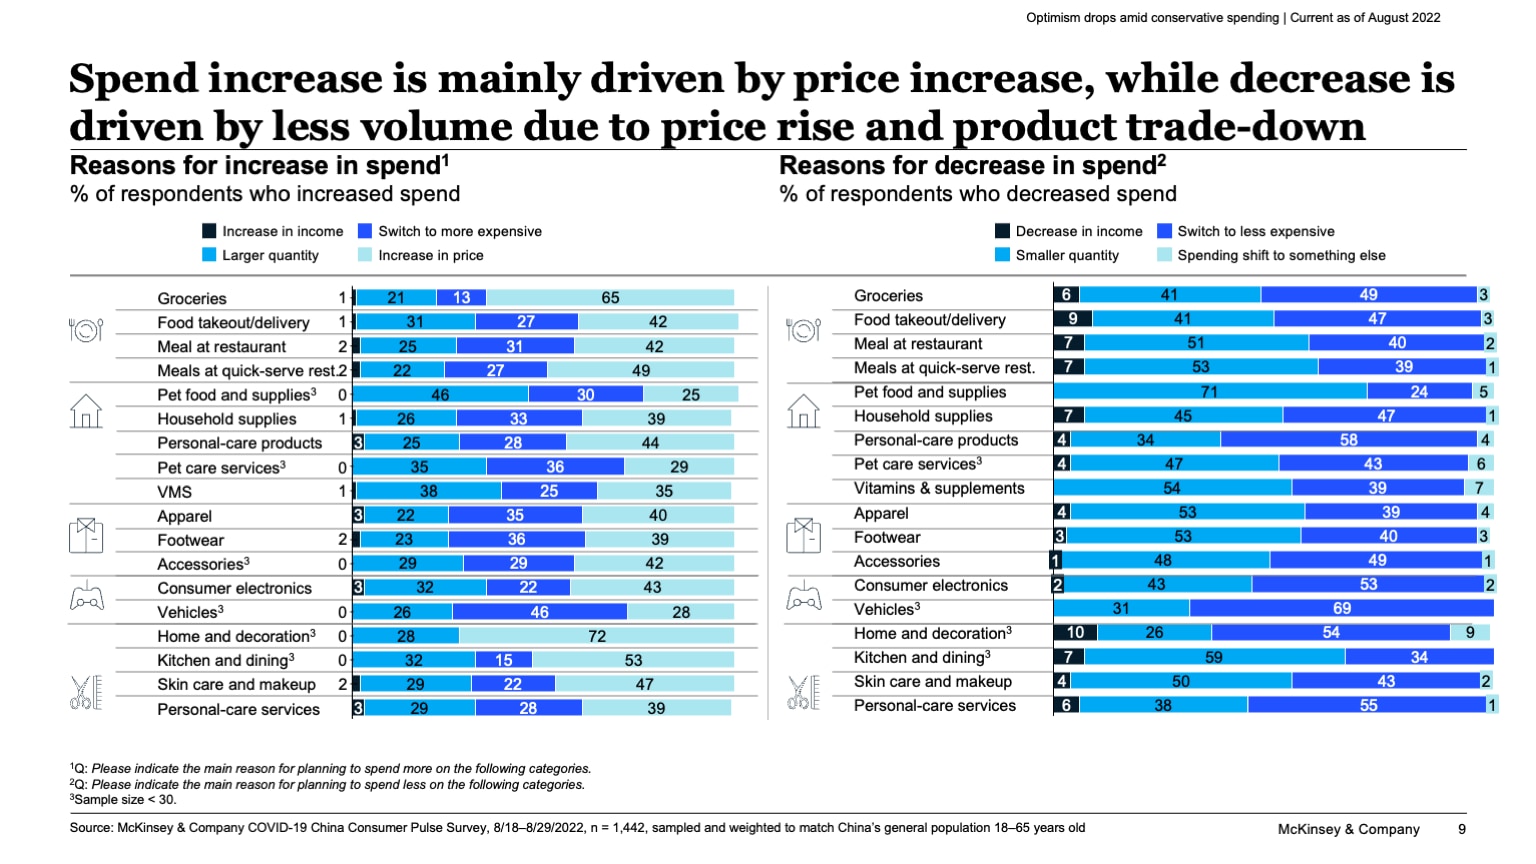 Spend increase is mainly driven by price increase, while decrease is driven by less volume due to price rise and product trade-down